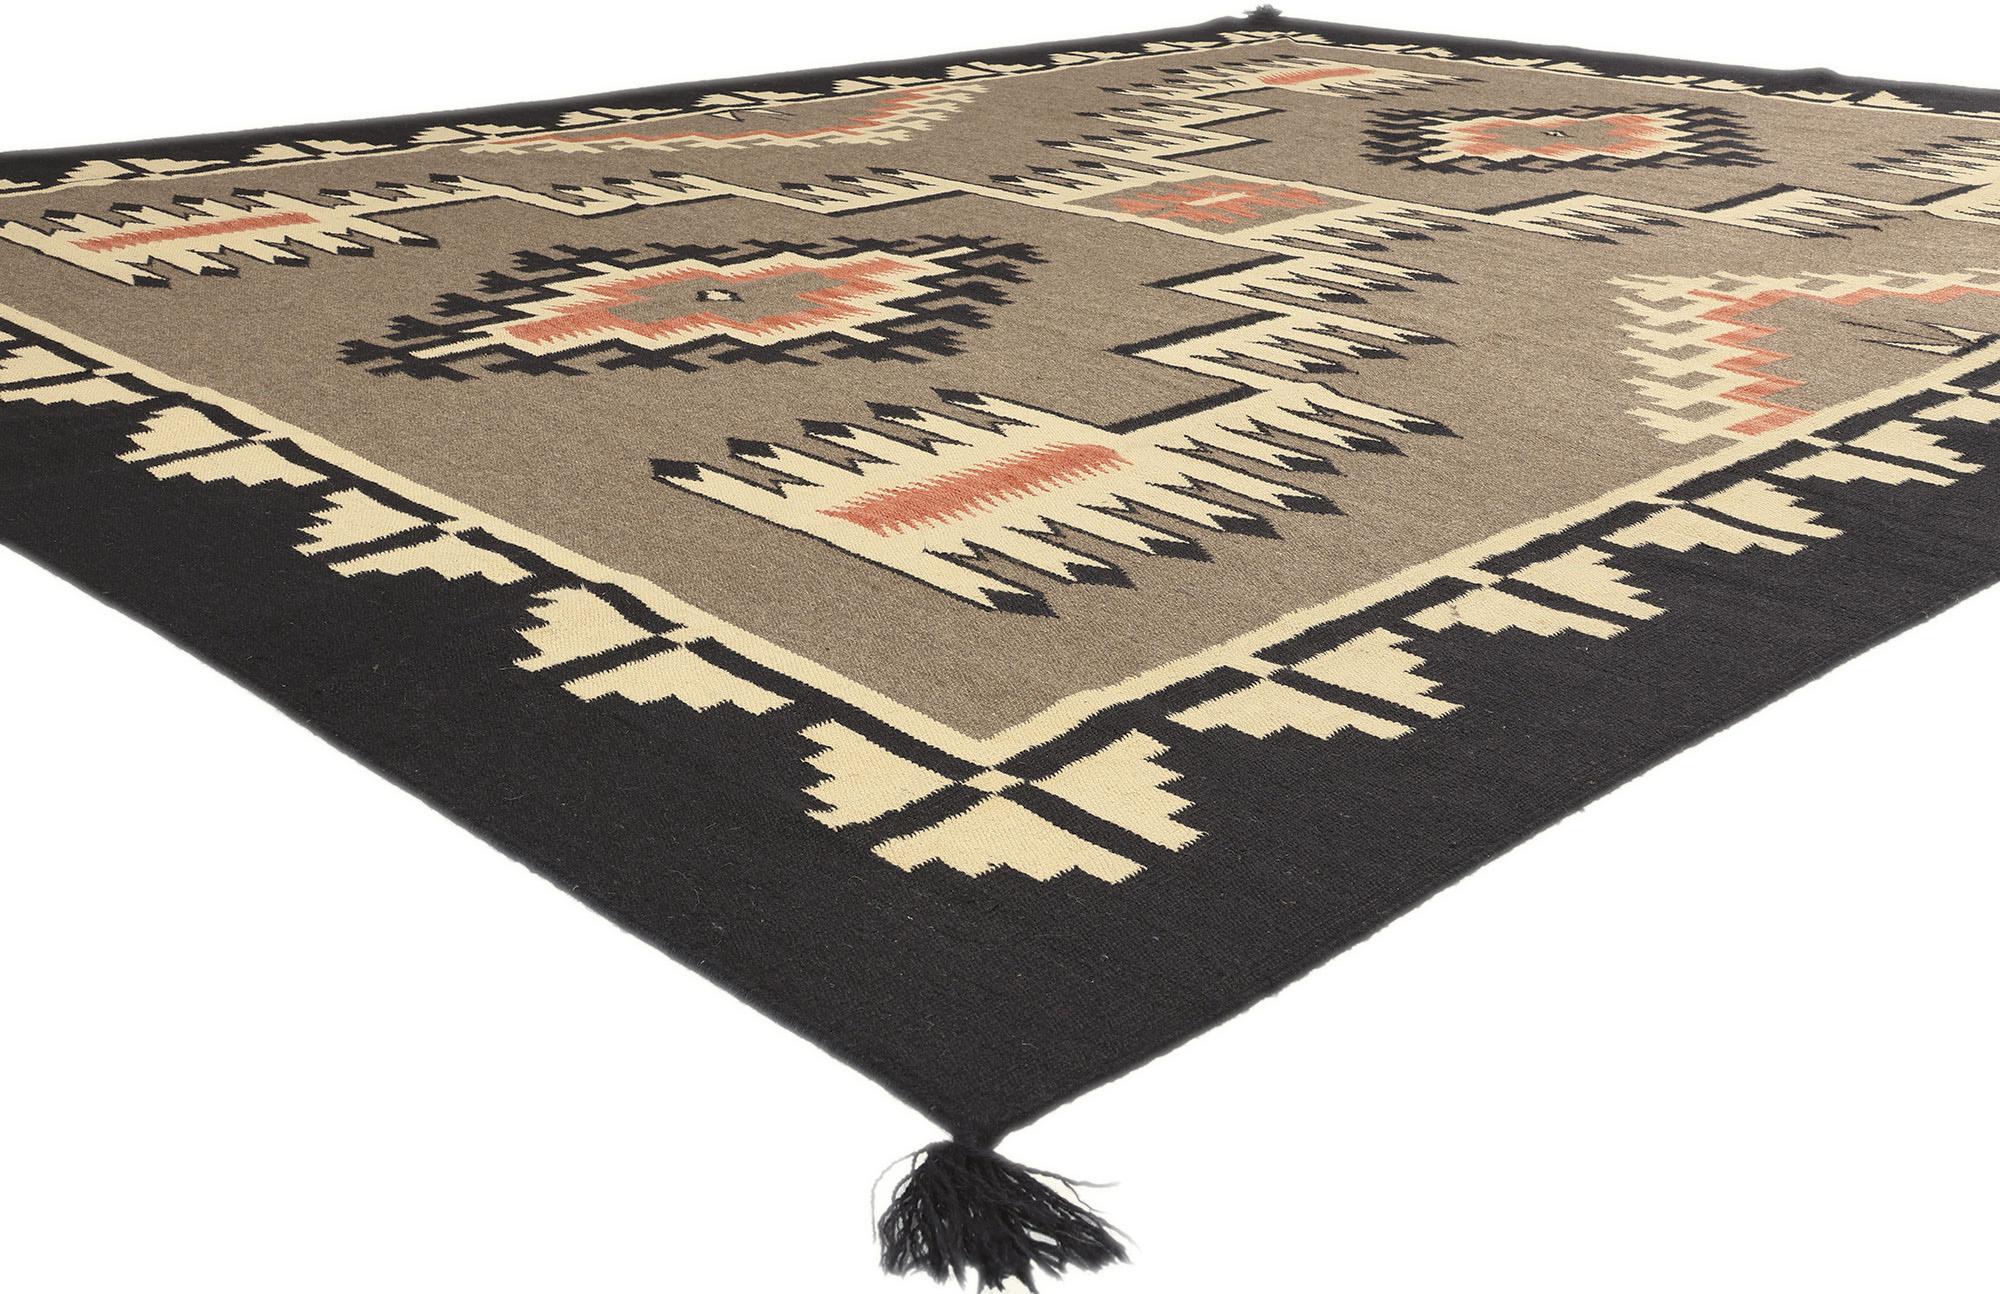 81023 Southwestern Navajo-Style Rug with Storm Pattern, 09'01 x 11'07. Enter the serene convergence of Native American design aesthetics, where the Shibui philosophy gracefully melds with the seamless fusion of Southwestern and Desert Modern styles